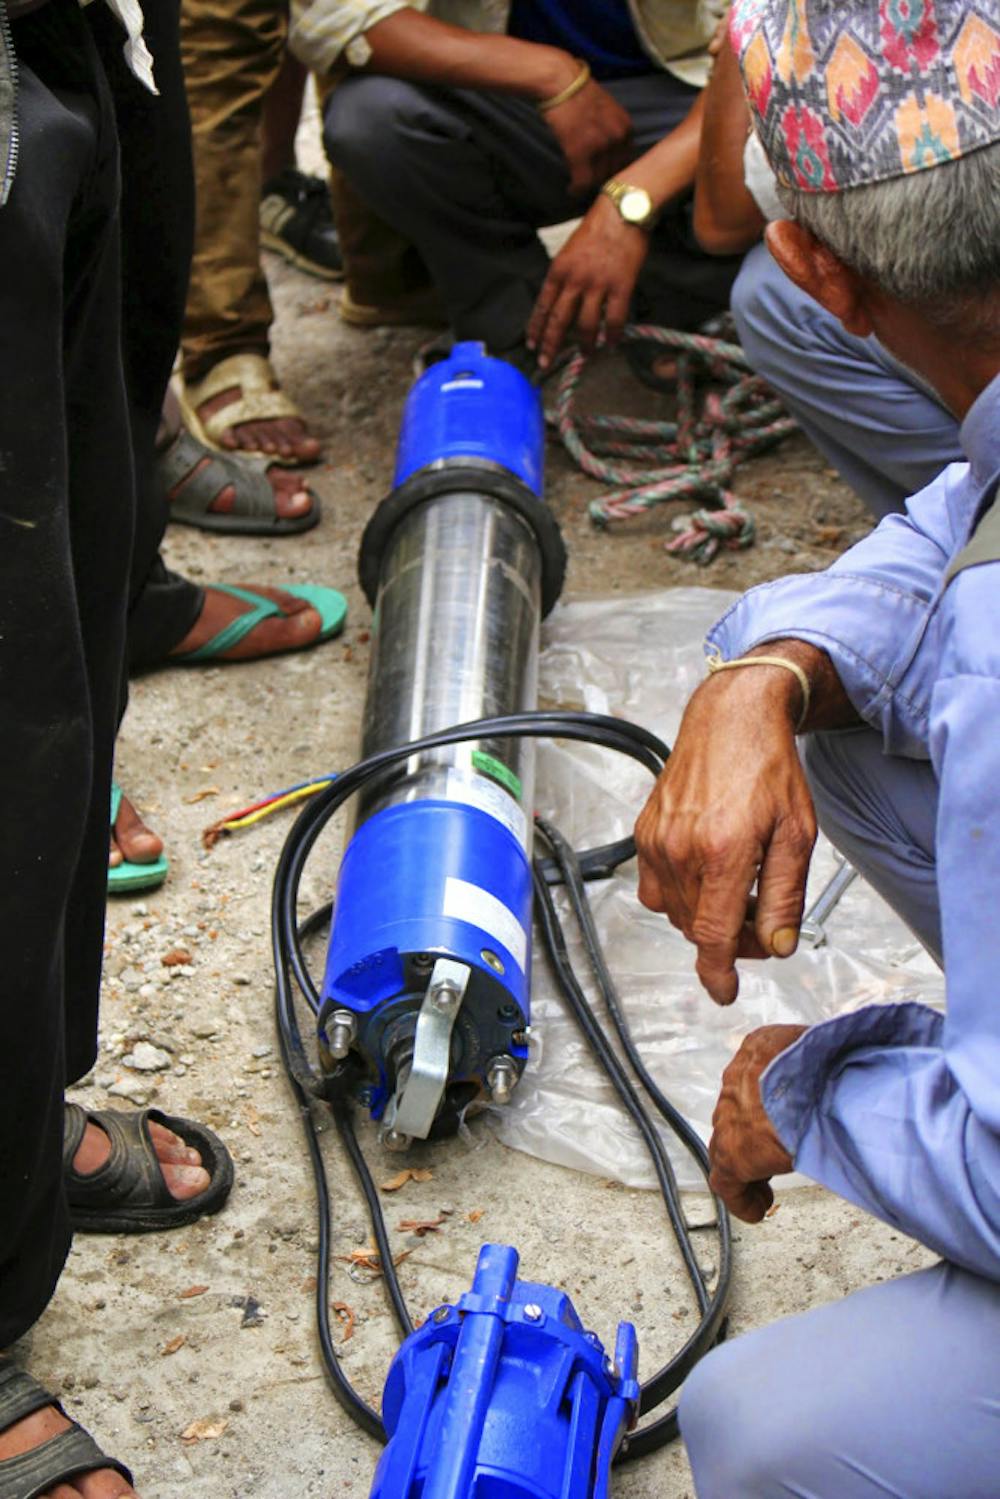 <p>UF’s Engineers without Borders install a new water pump in Nepal during their 2014 trip. This year, the a team of about seven students will return to Nepal to build a hand-washing stations and teach hygiene programs at the local schools.</p>